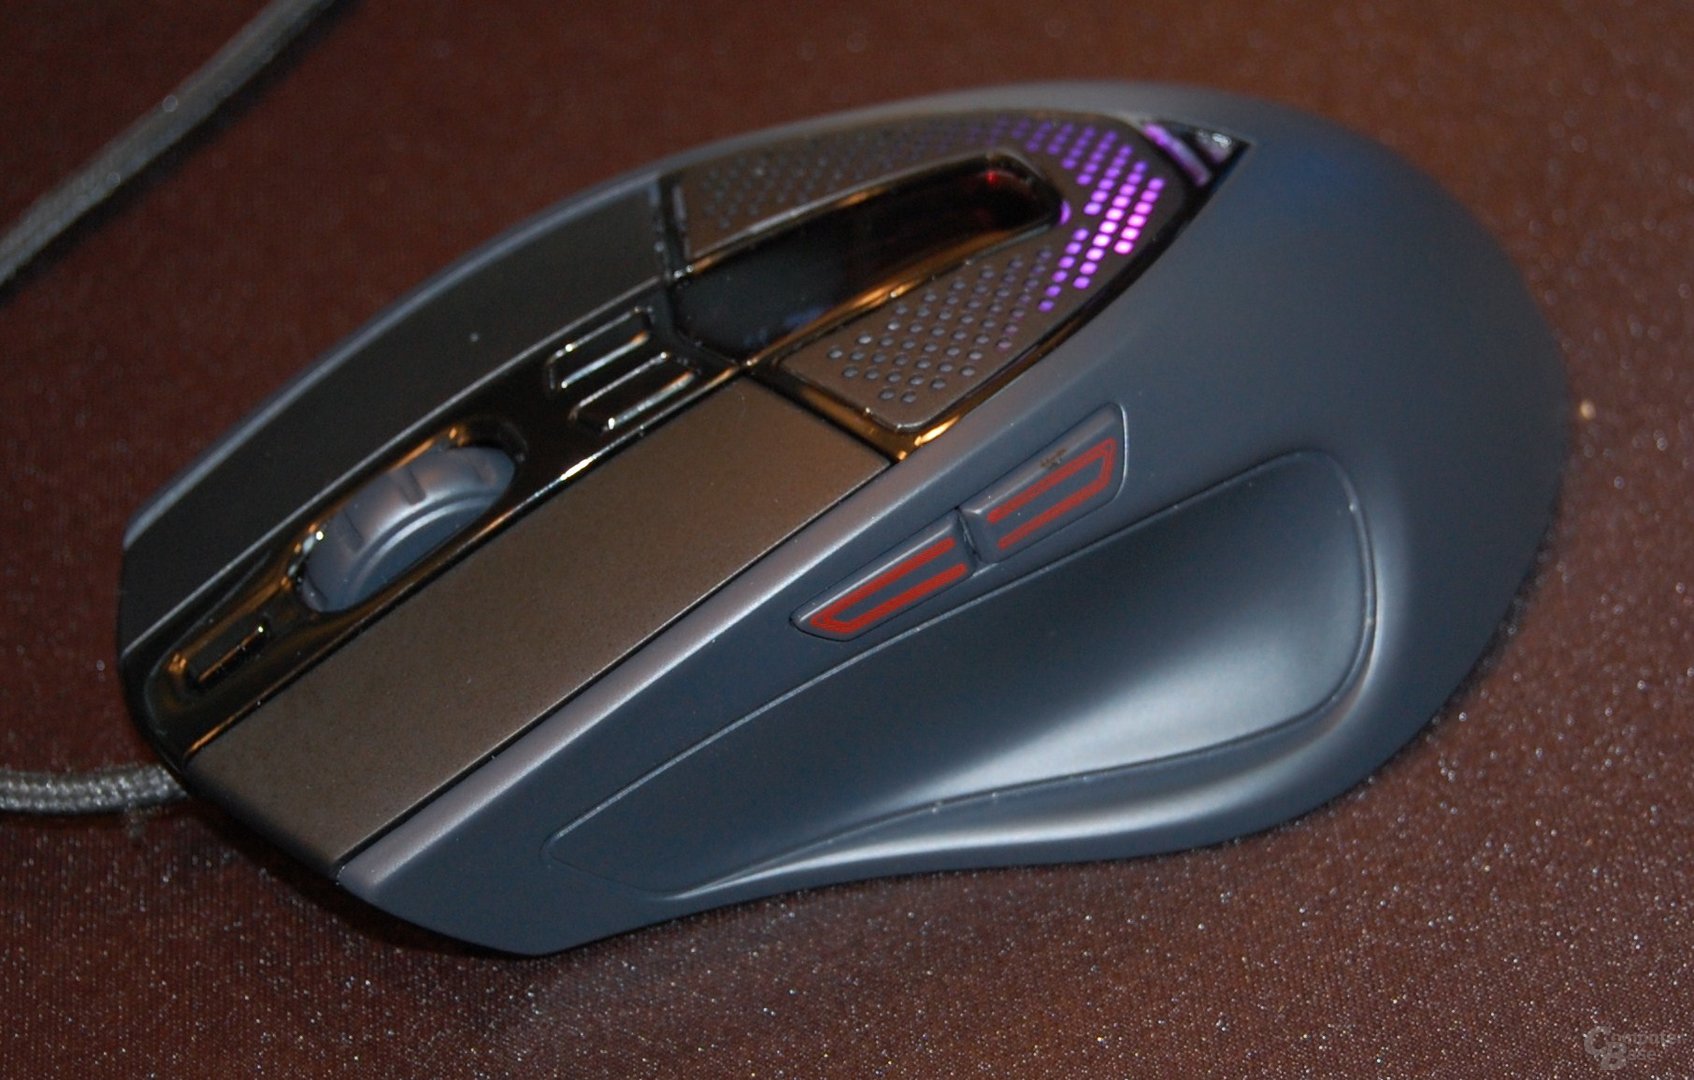 CM Storm Sentinel Advance Gaming Mouse